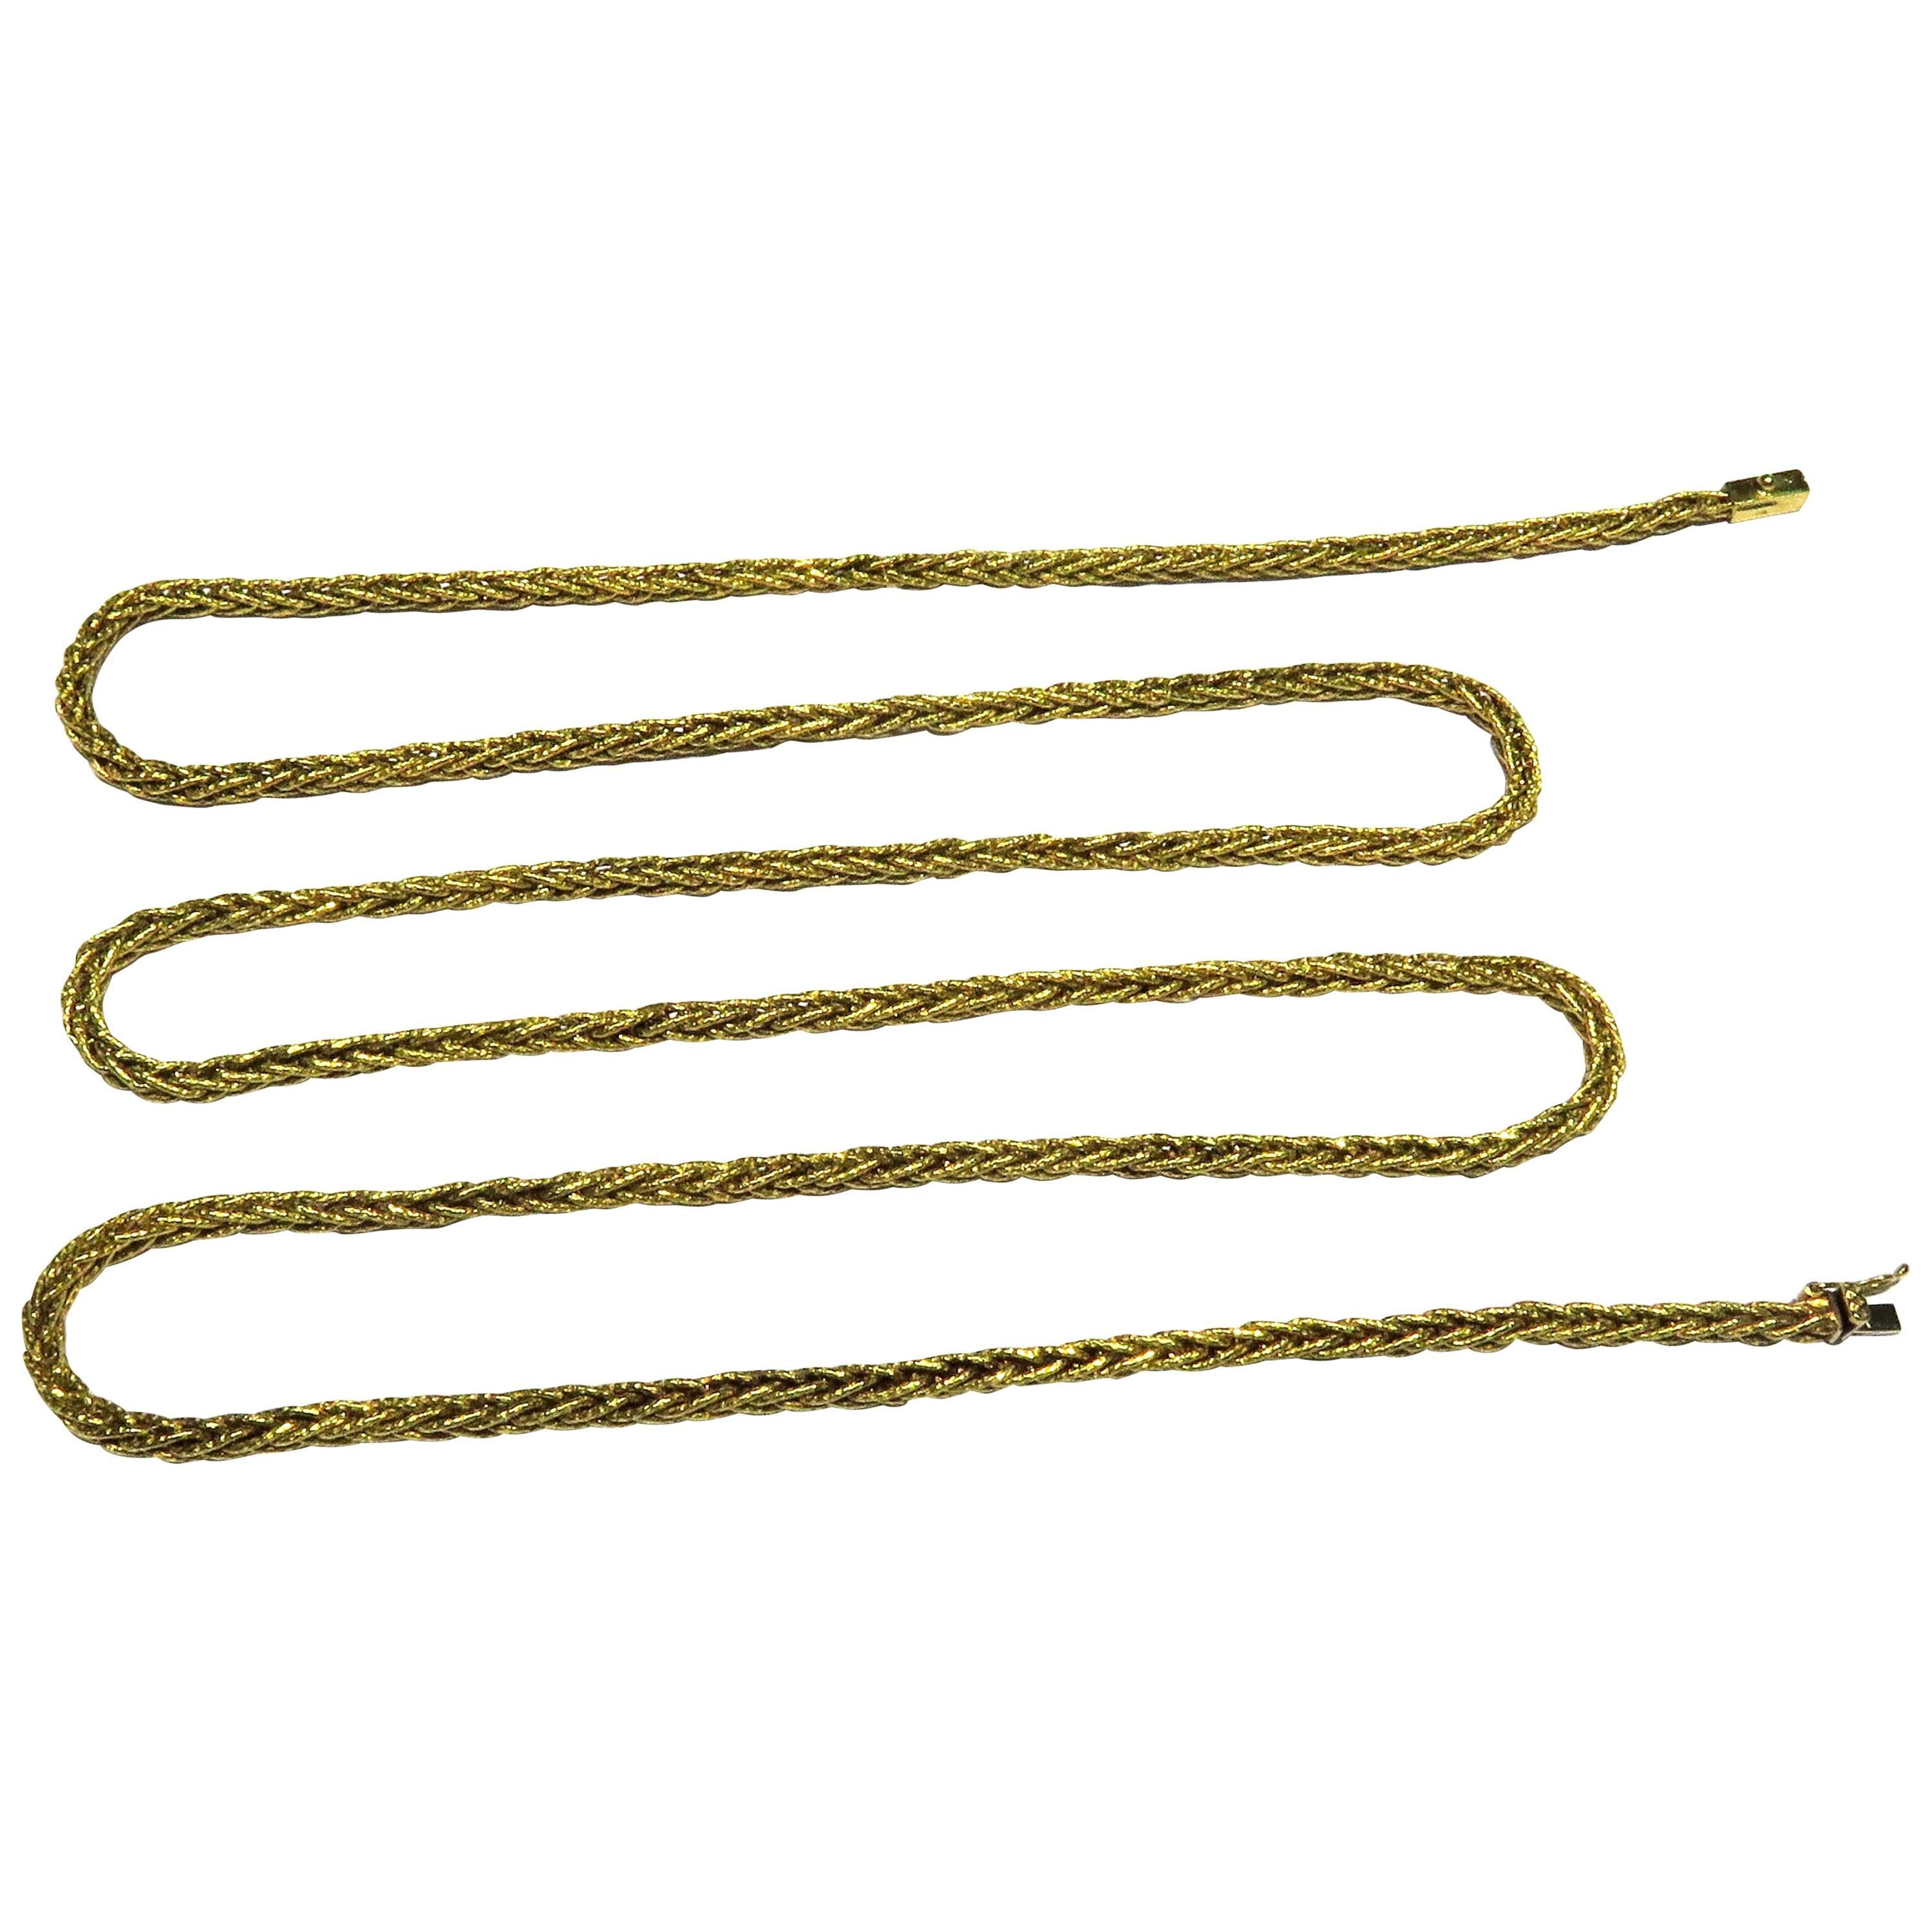 Tiffany 18 Karat yellow gold extra long woven chain. This classic chain can be worn long or doubled for a two chain look or even add a pendant or charm. This chain can be worn alone for a dramatic look or worn with other chains for a layered